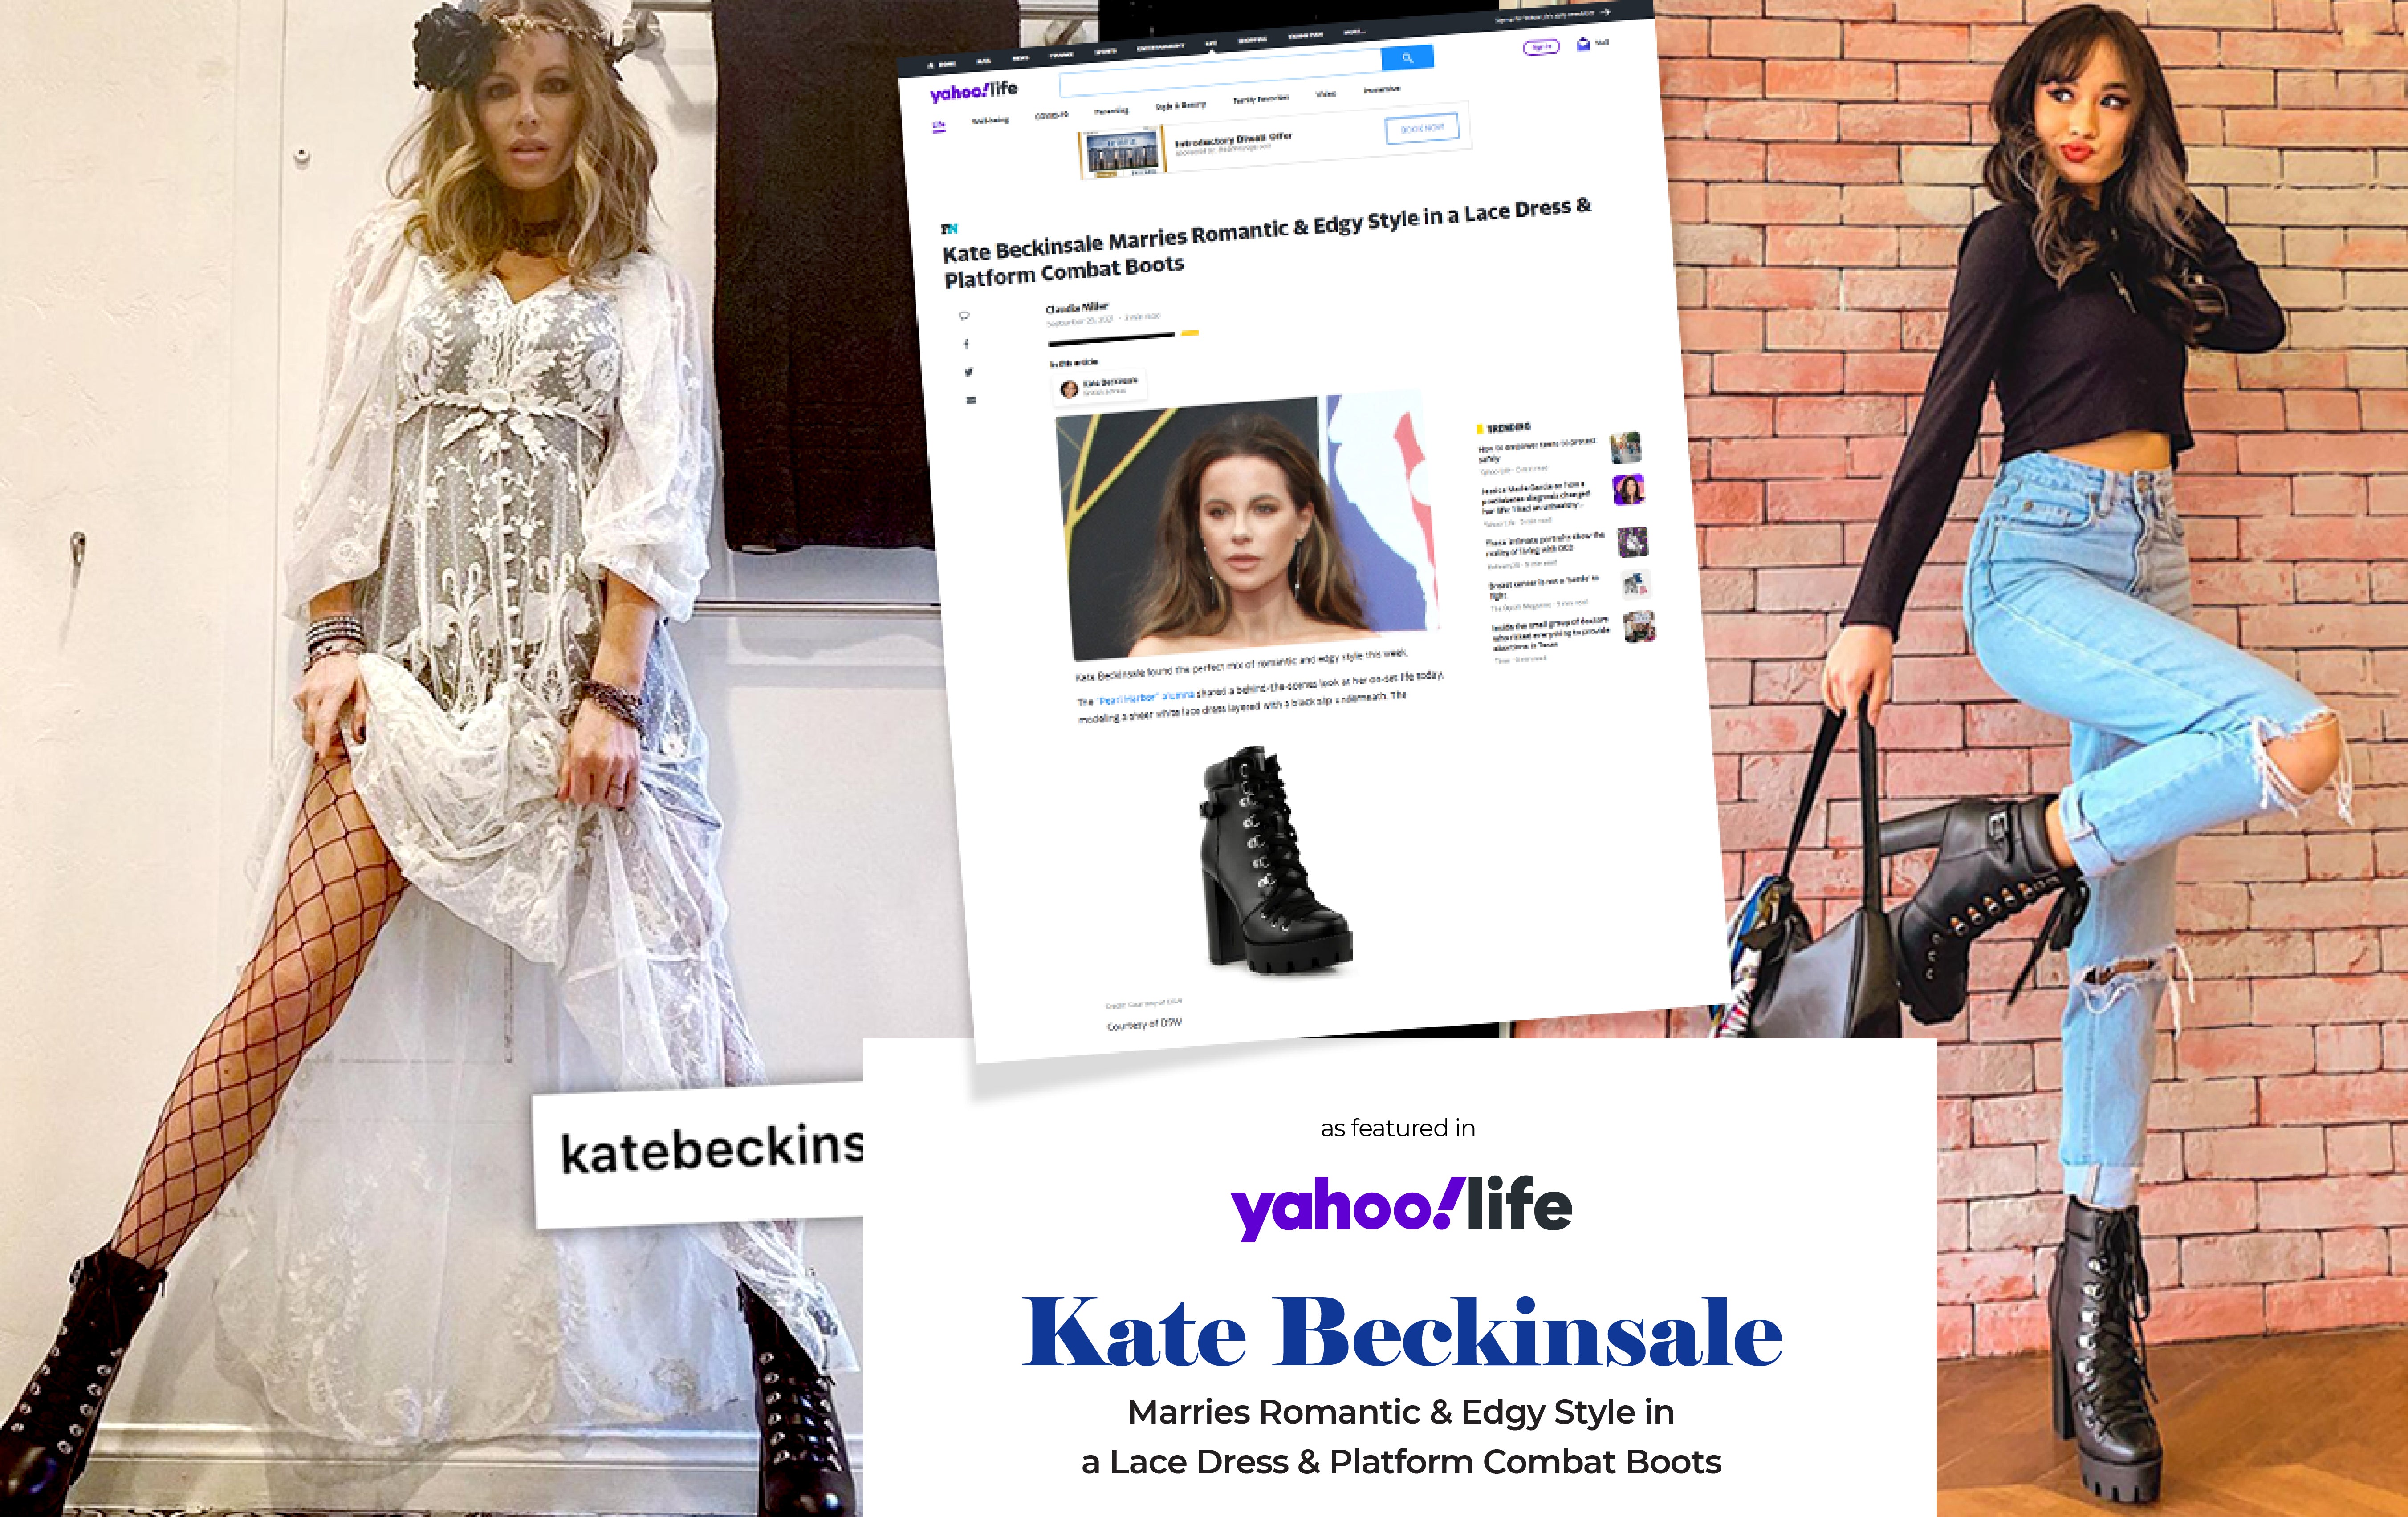 Kate Beckinsale Marries Romantic & Edgy Style in a Lace Dress & Platform Combat Boots